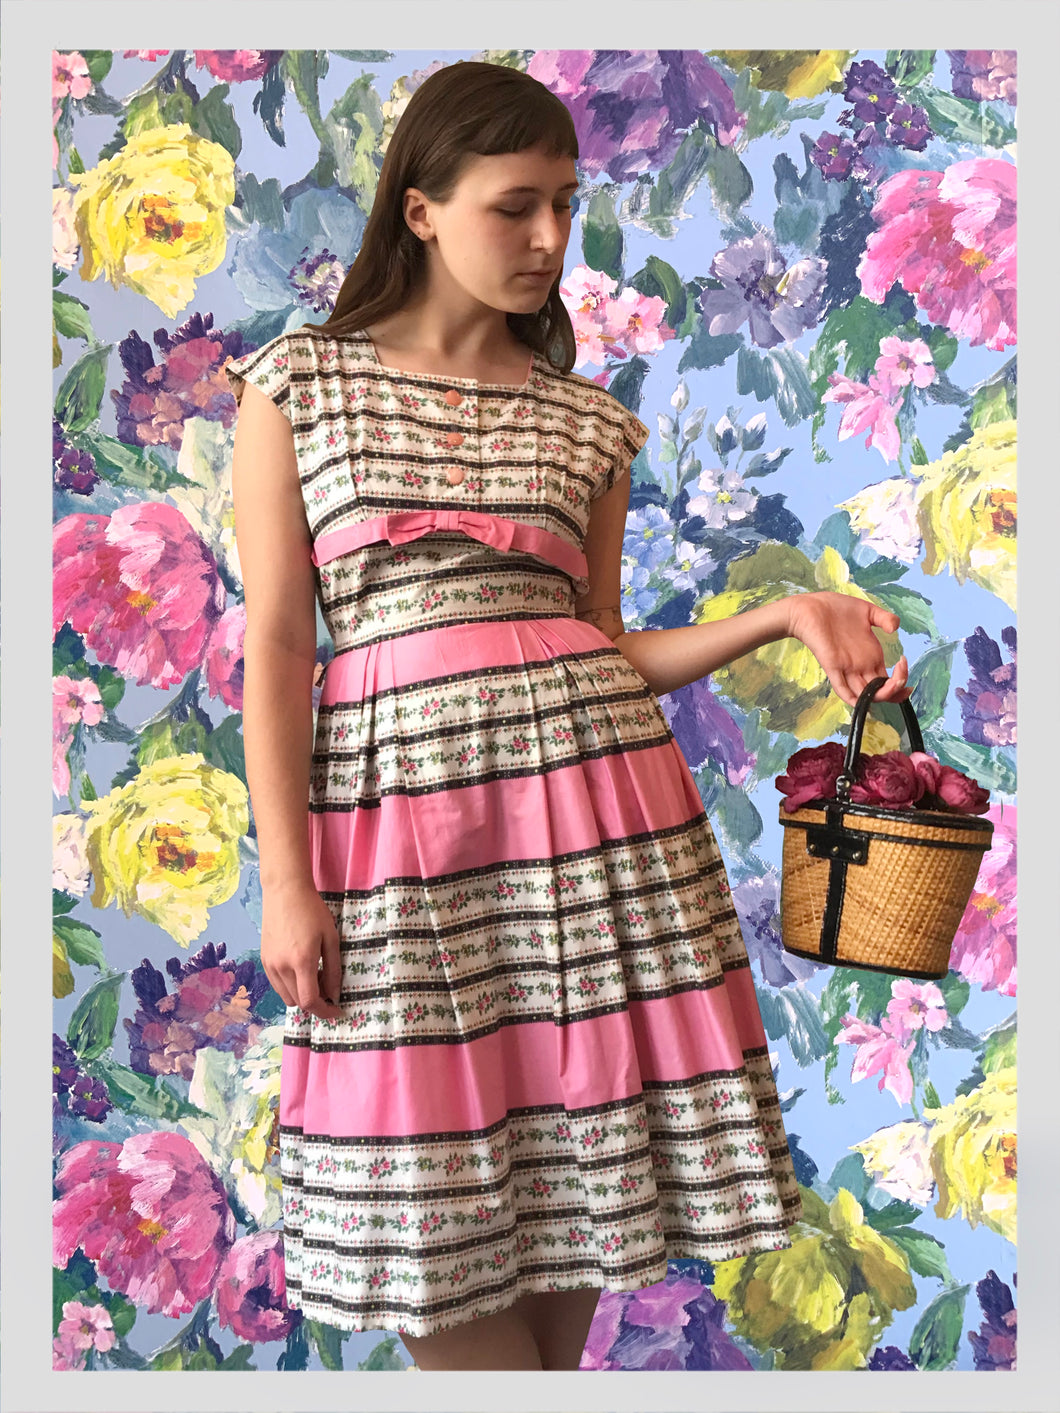 Horrockses Cotton Pink Striped Day Dress from Dress, in Bridport